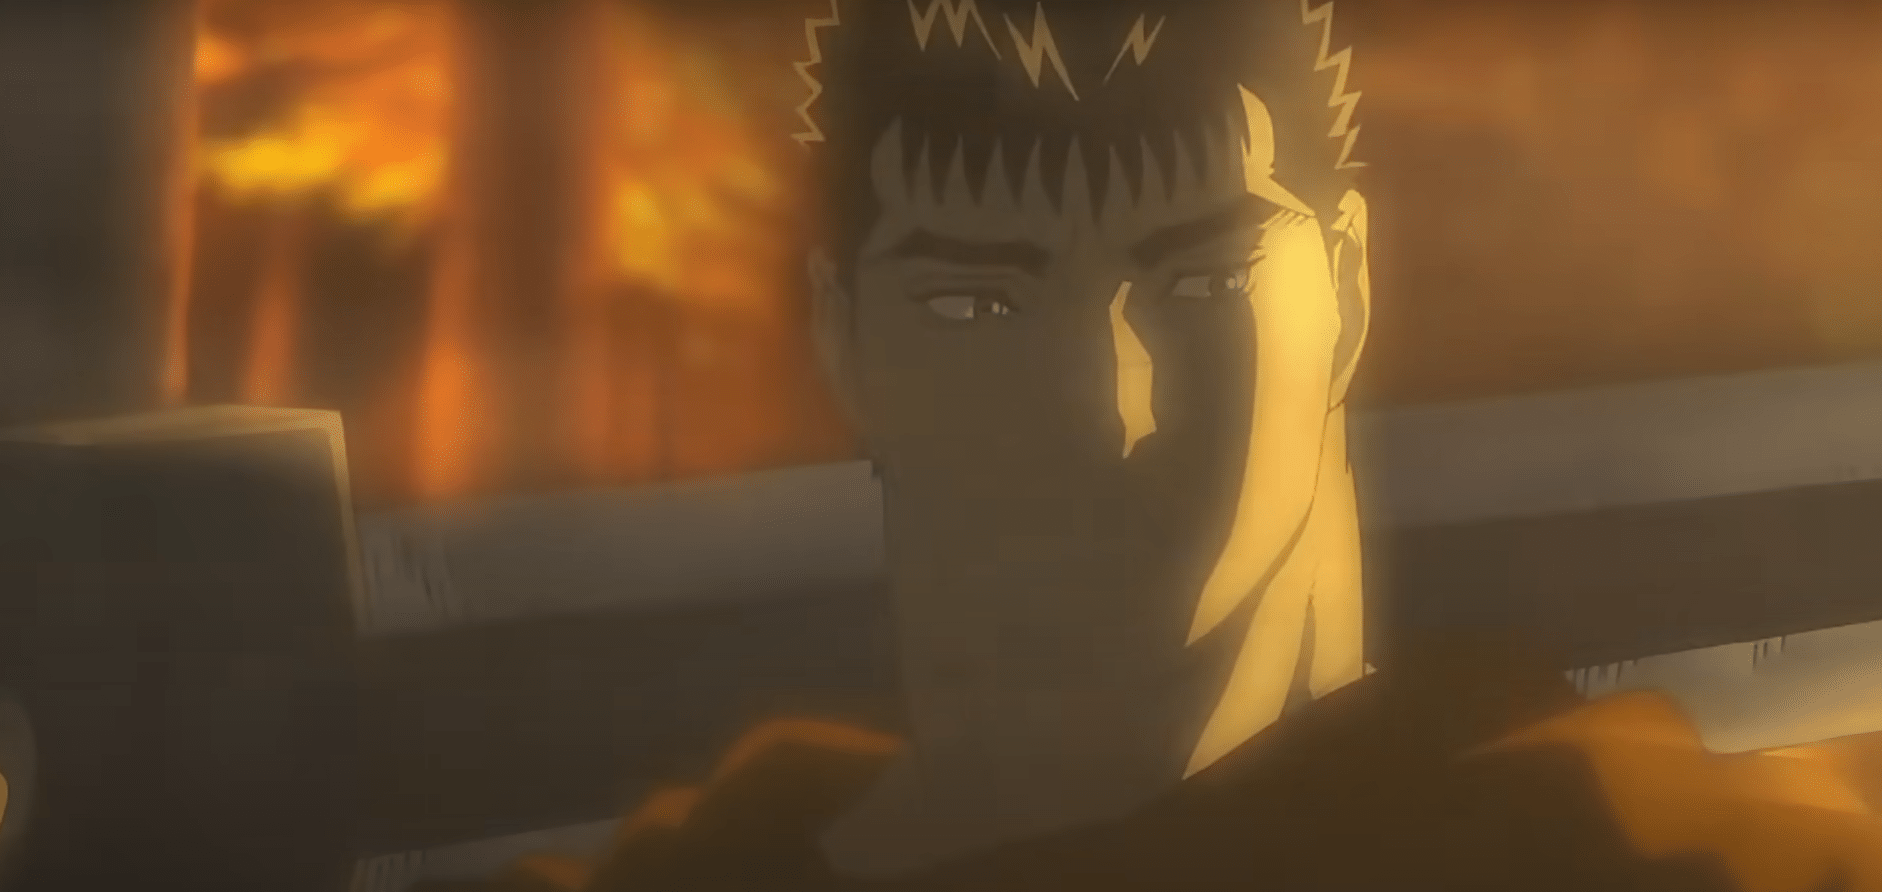 Why Guts is Brutally Awesome